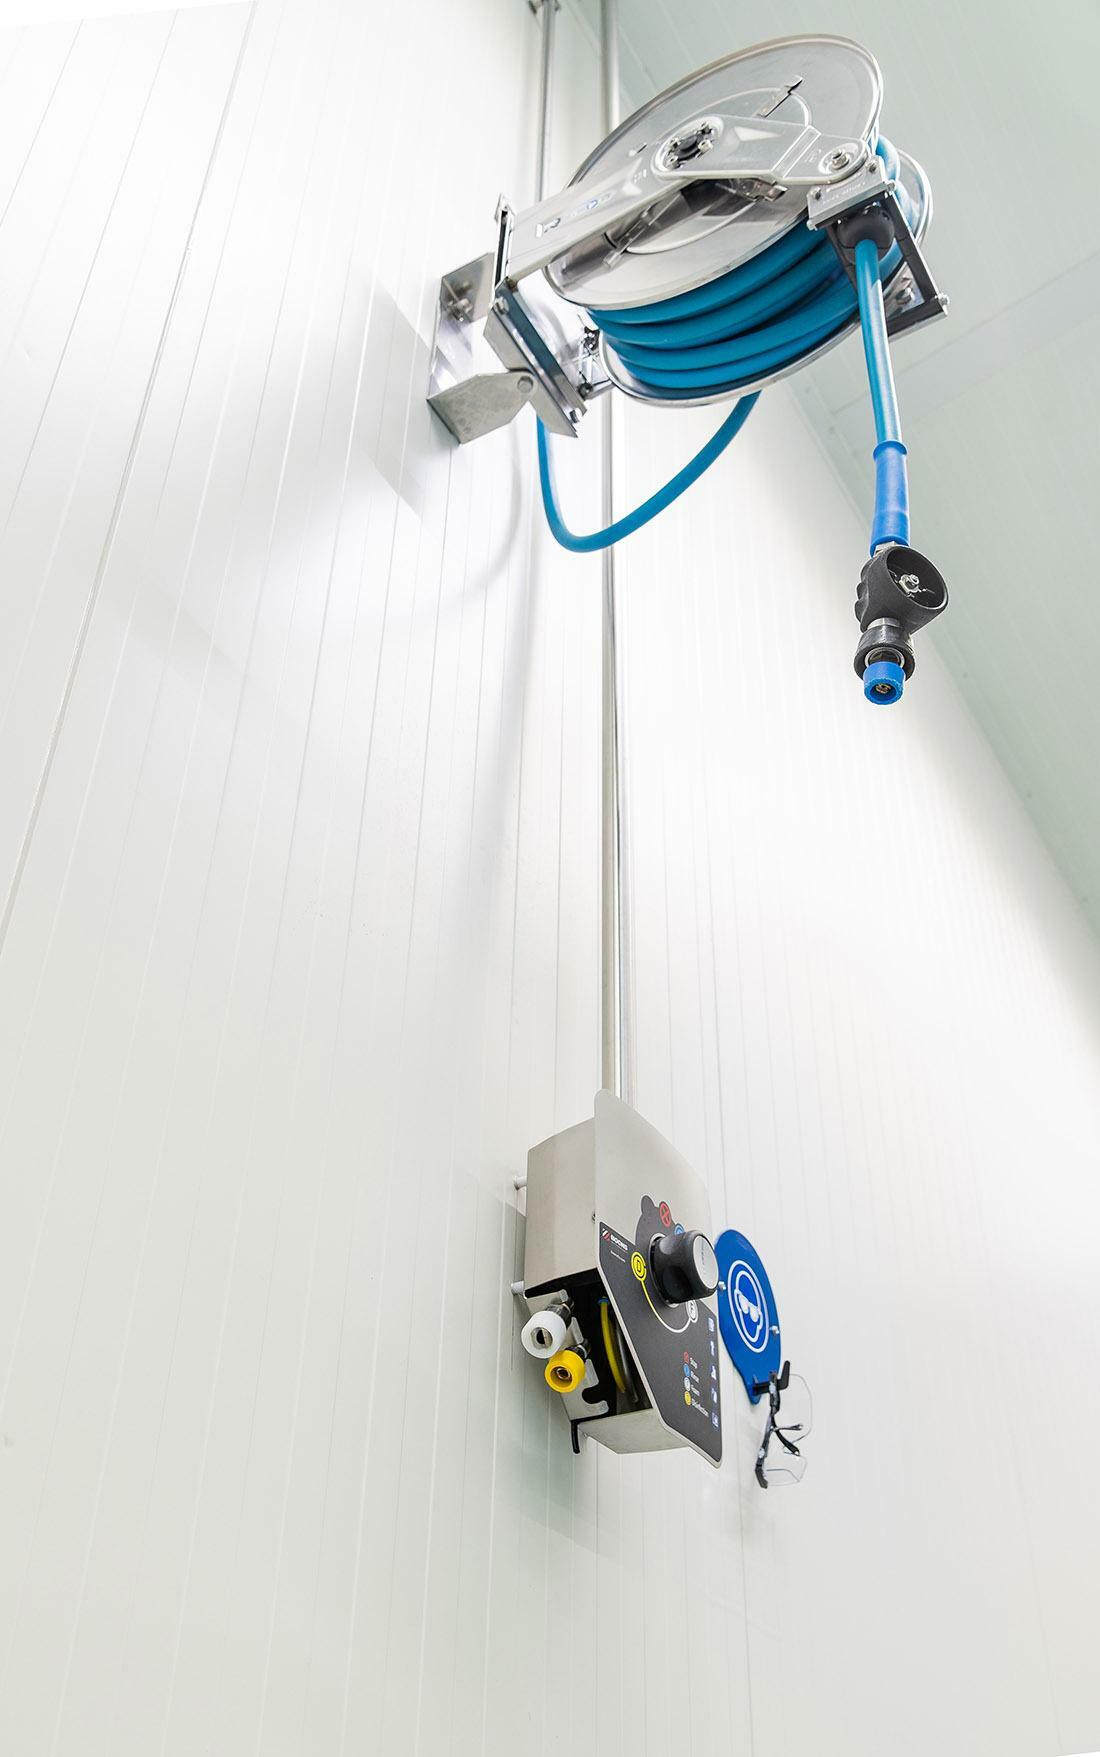 disinfection and foam installations centralized cleaning system CS satellite Stainless steel reel with food approved cleaning hoses Boons Jet spray gun nozzles Boons FIS